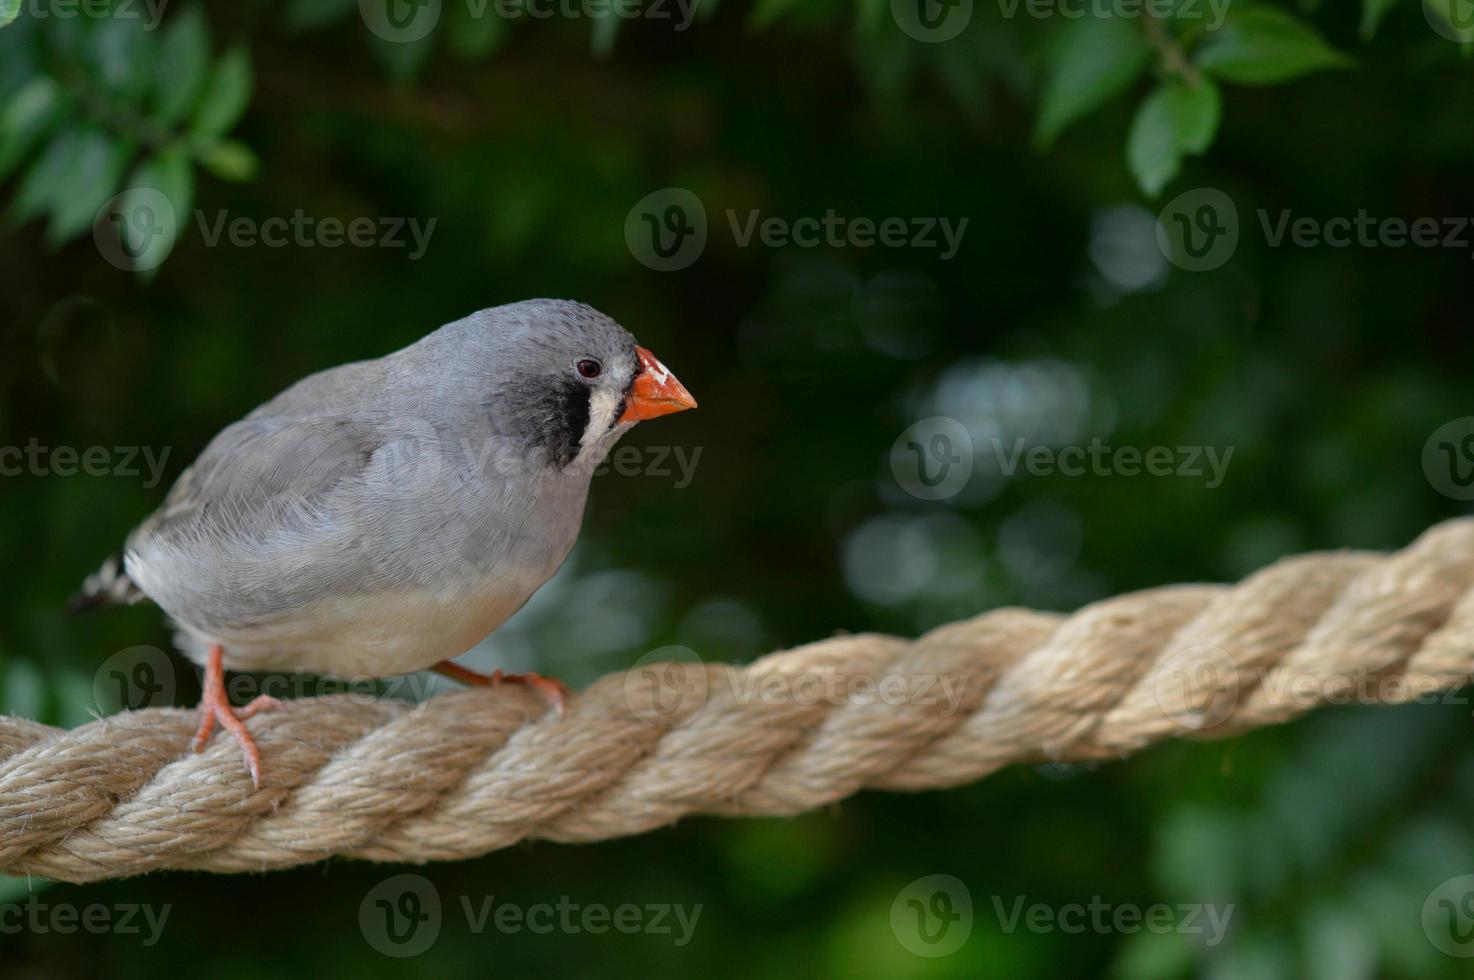 Zebra finch in the butterfly house on a rope photo